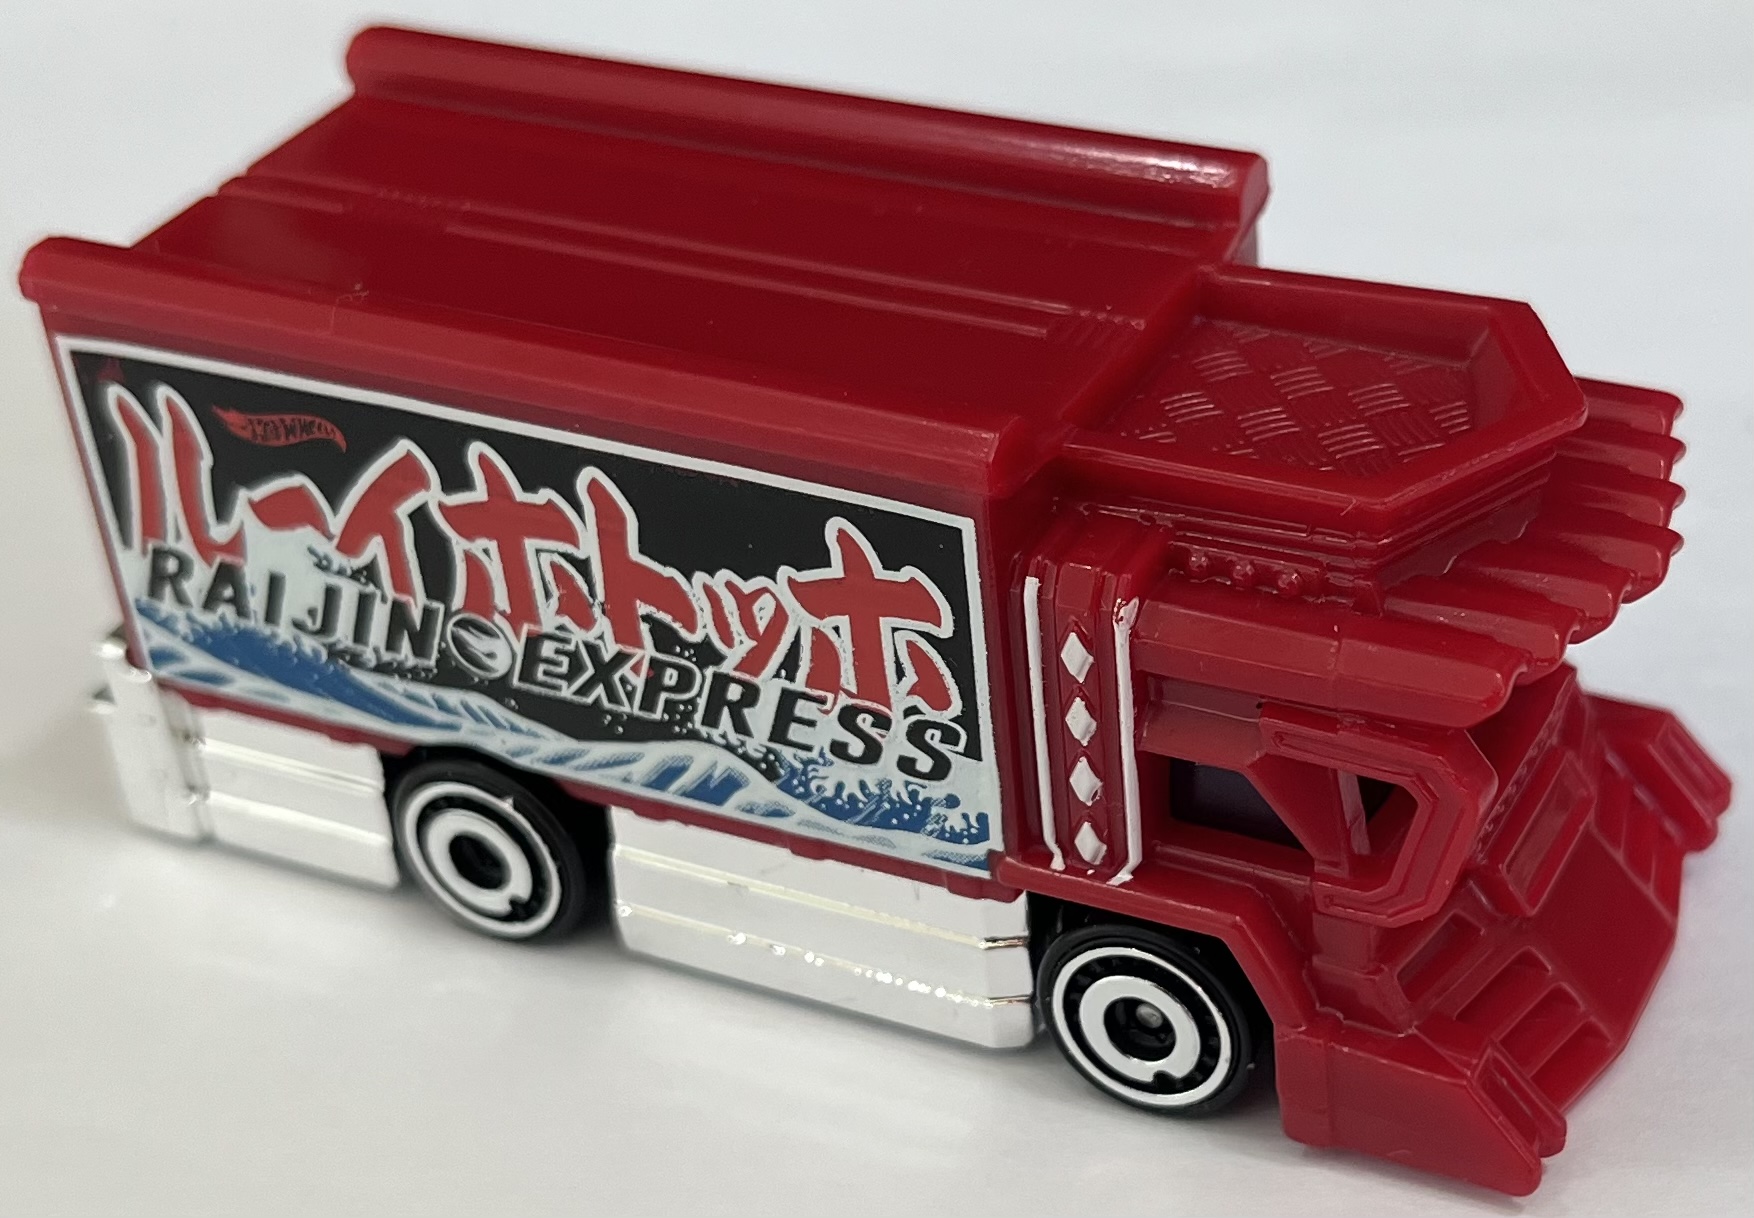 Does Hot Wheels Skate Have T-Hunts? If so, is this one of them